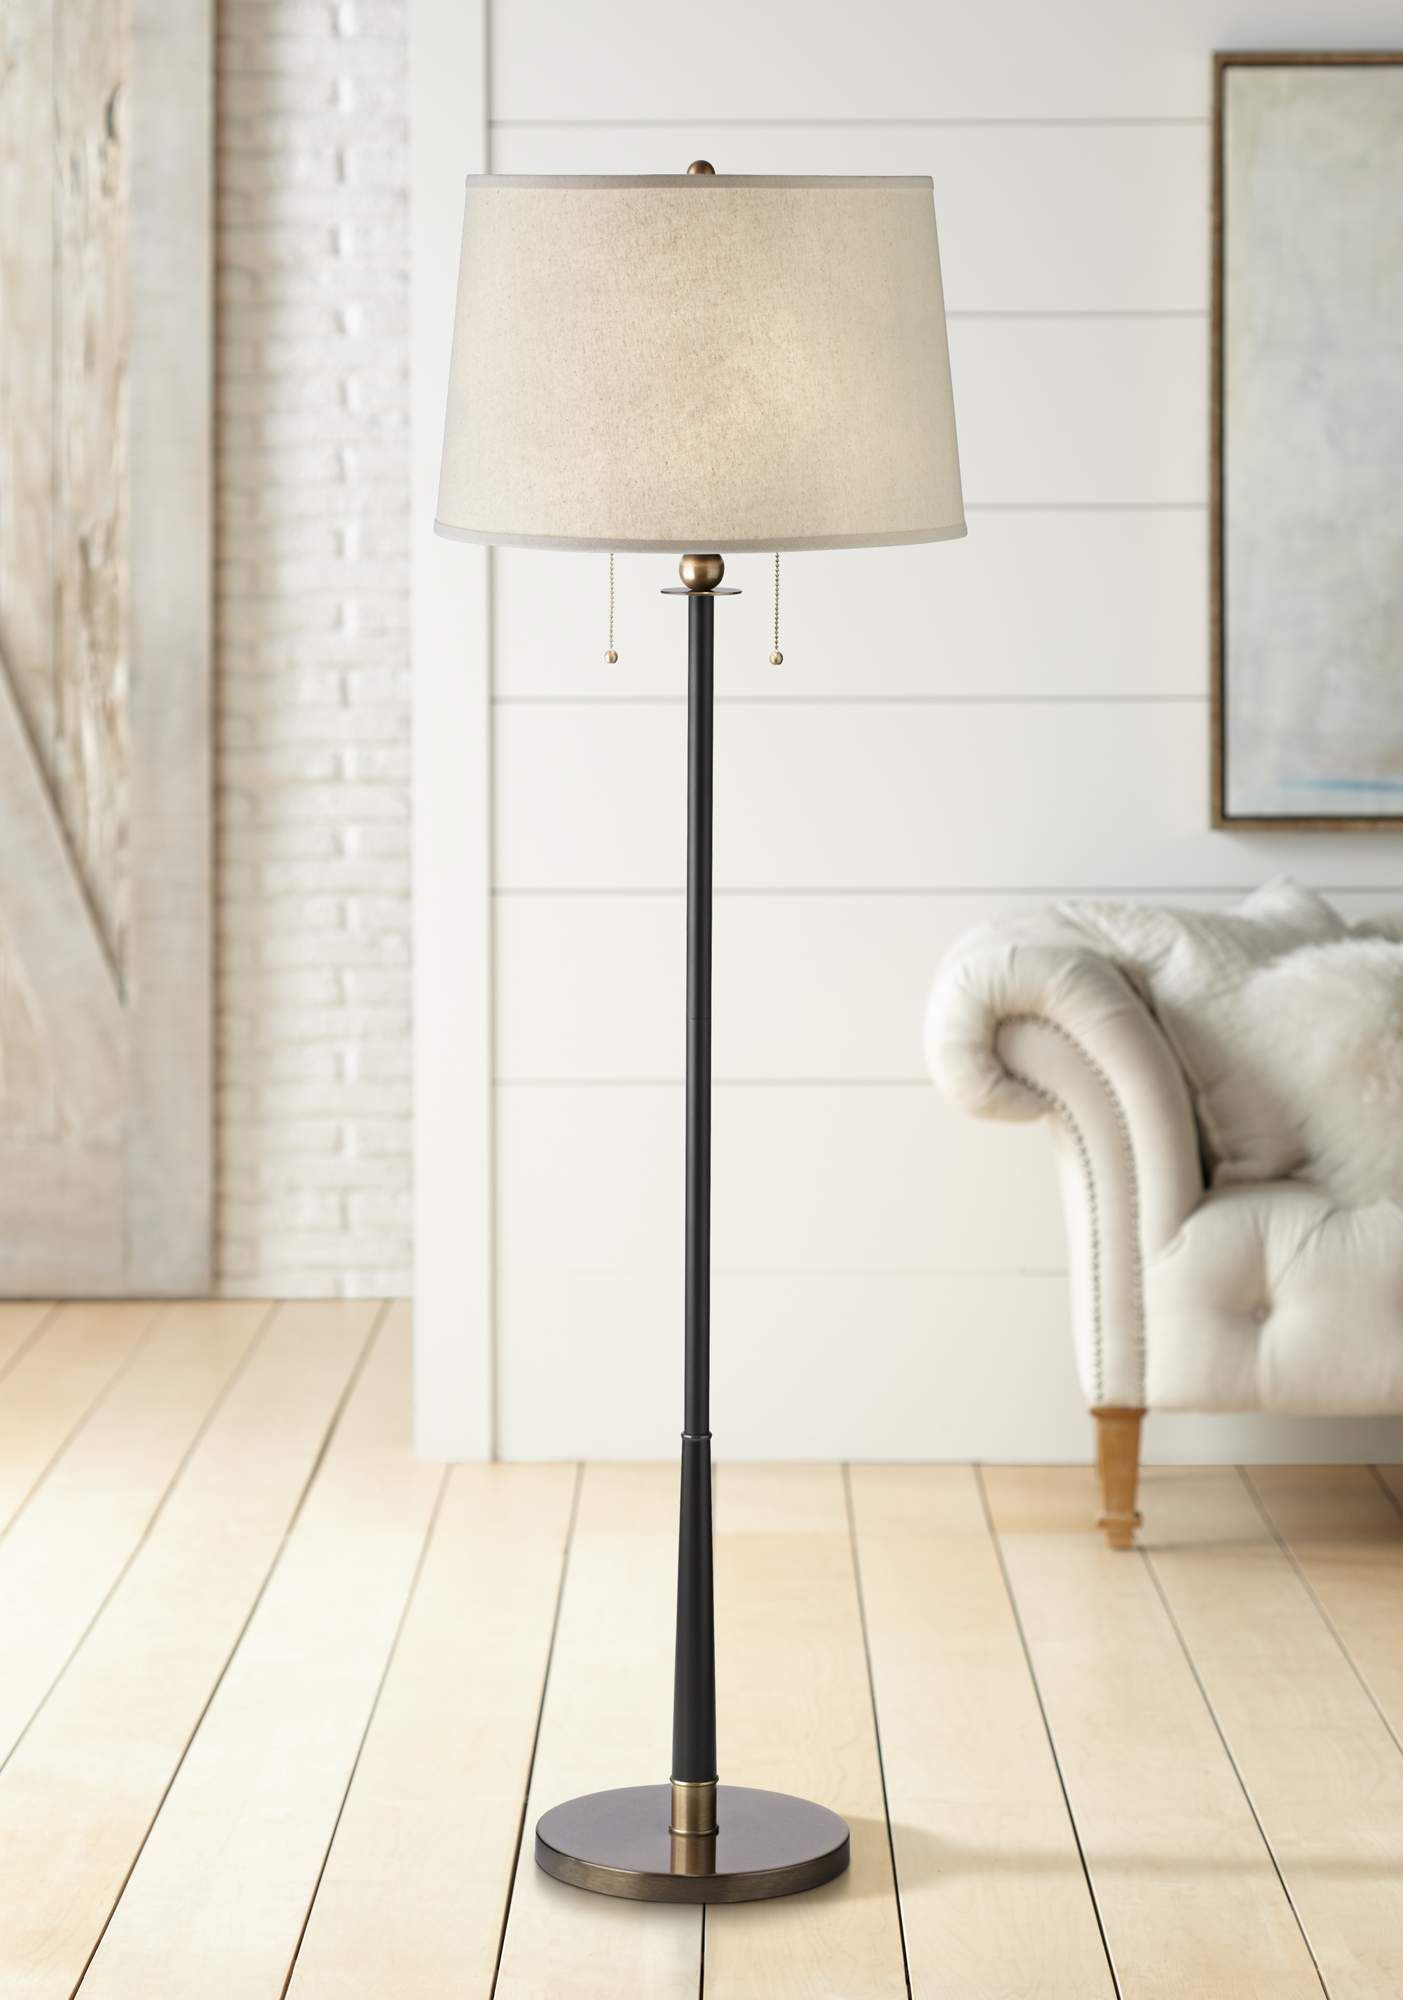 Kathy Ireland City Heights 59 High Antique Brass Floor Lamp pertaining to sizing 1403 X 2000